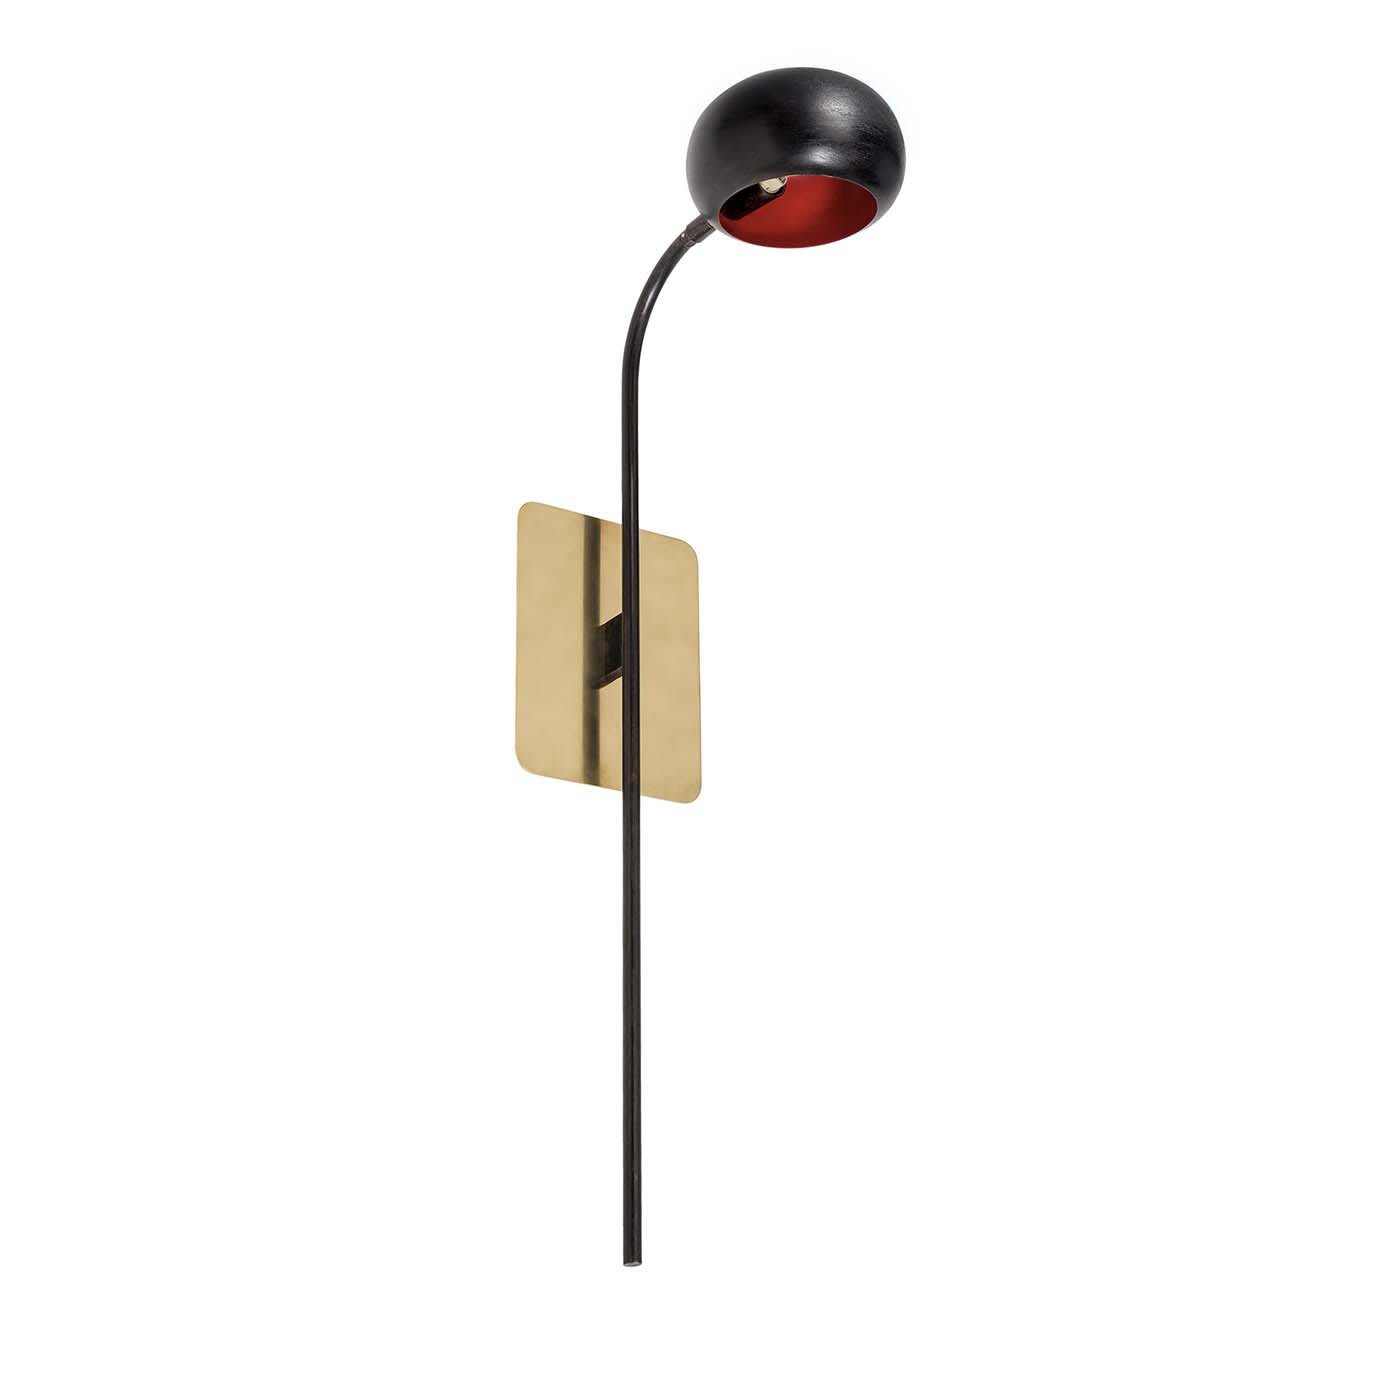 B'Tulip Black and Red Sconce - Bronzetto